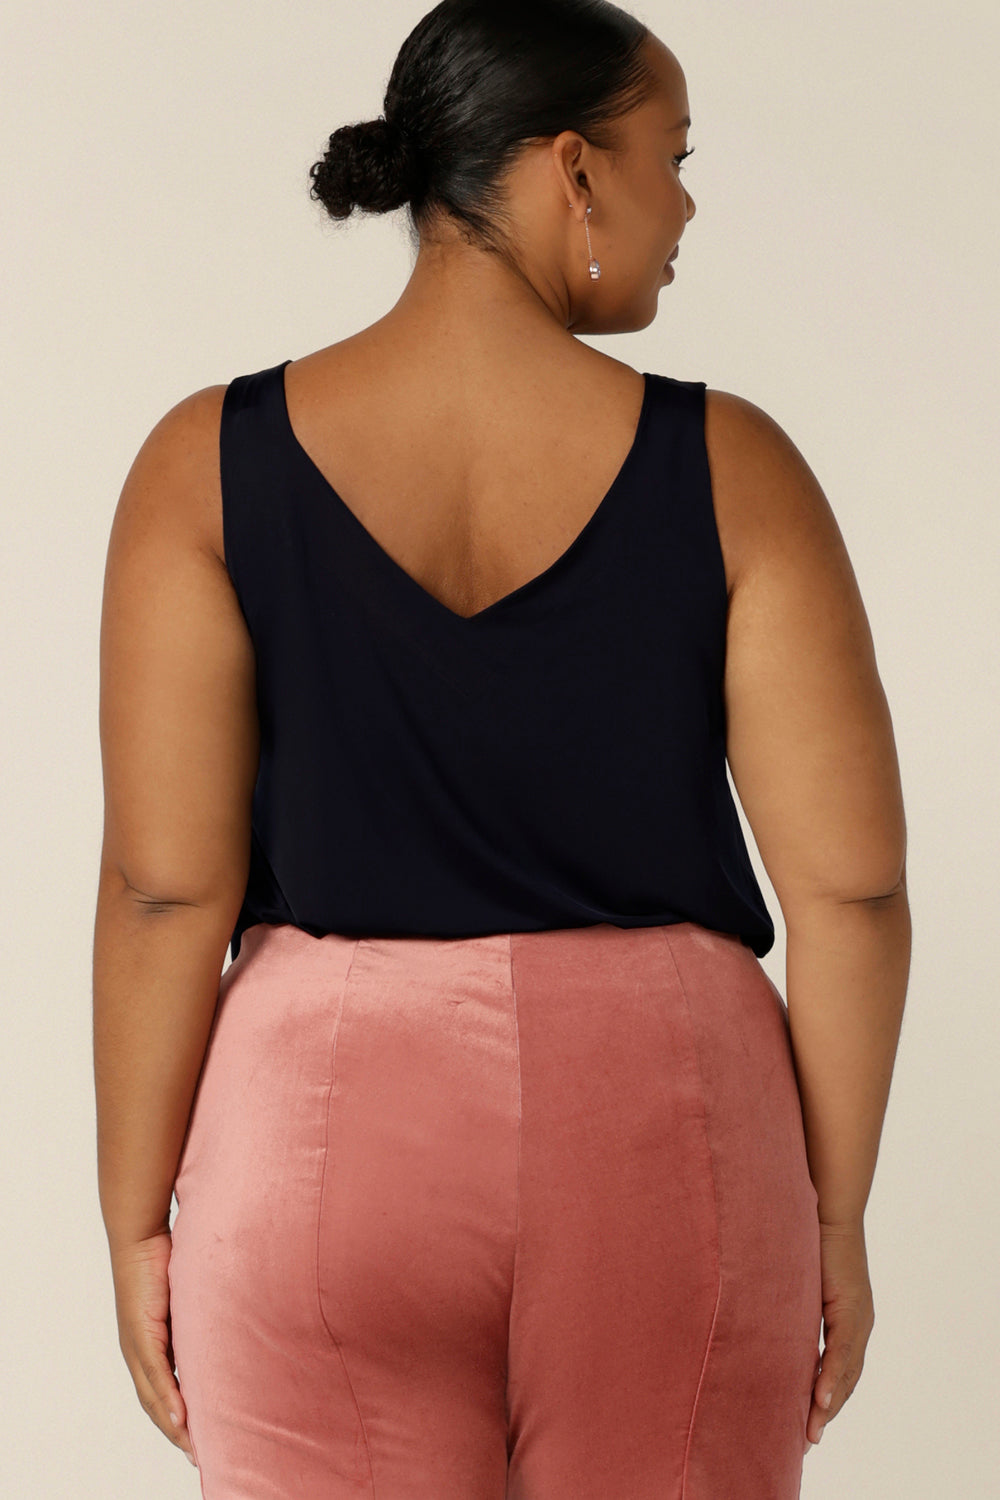 Back view of a size 18, fuller figure woman wearing a V-back, navy cami top with wide shoulder straps. Made in Australia by Australian and New Zealand women's clothing company, this slinky jersey top wears well with evening and occasionwear skirts, pants and suit jackets.